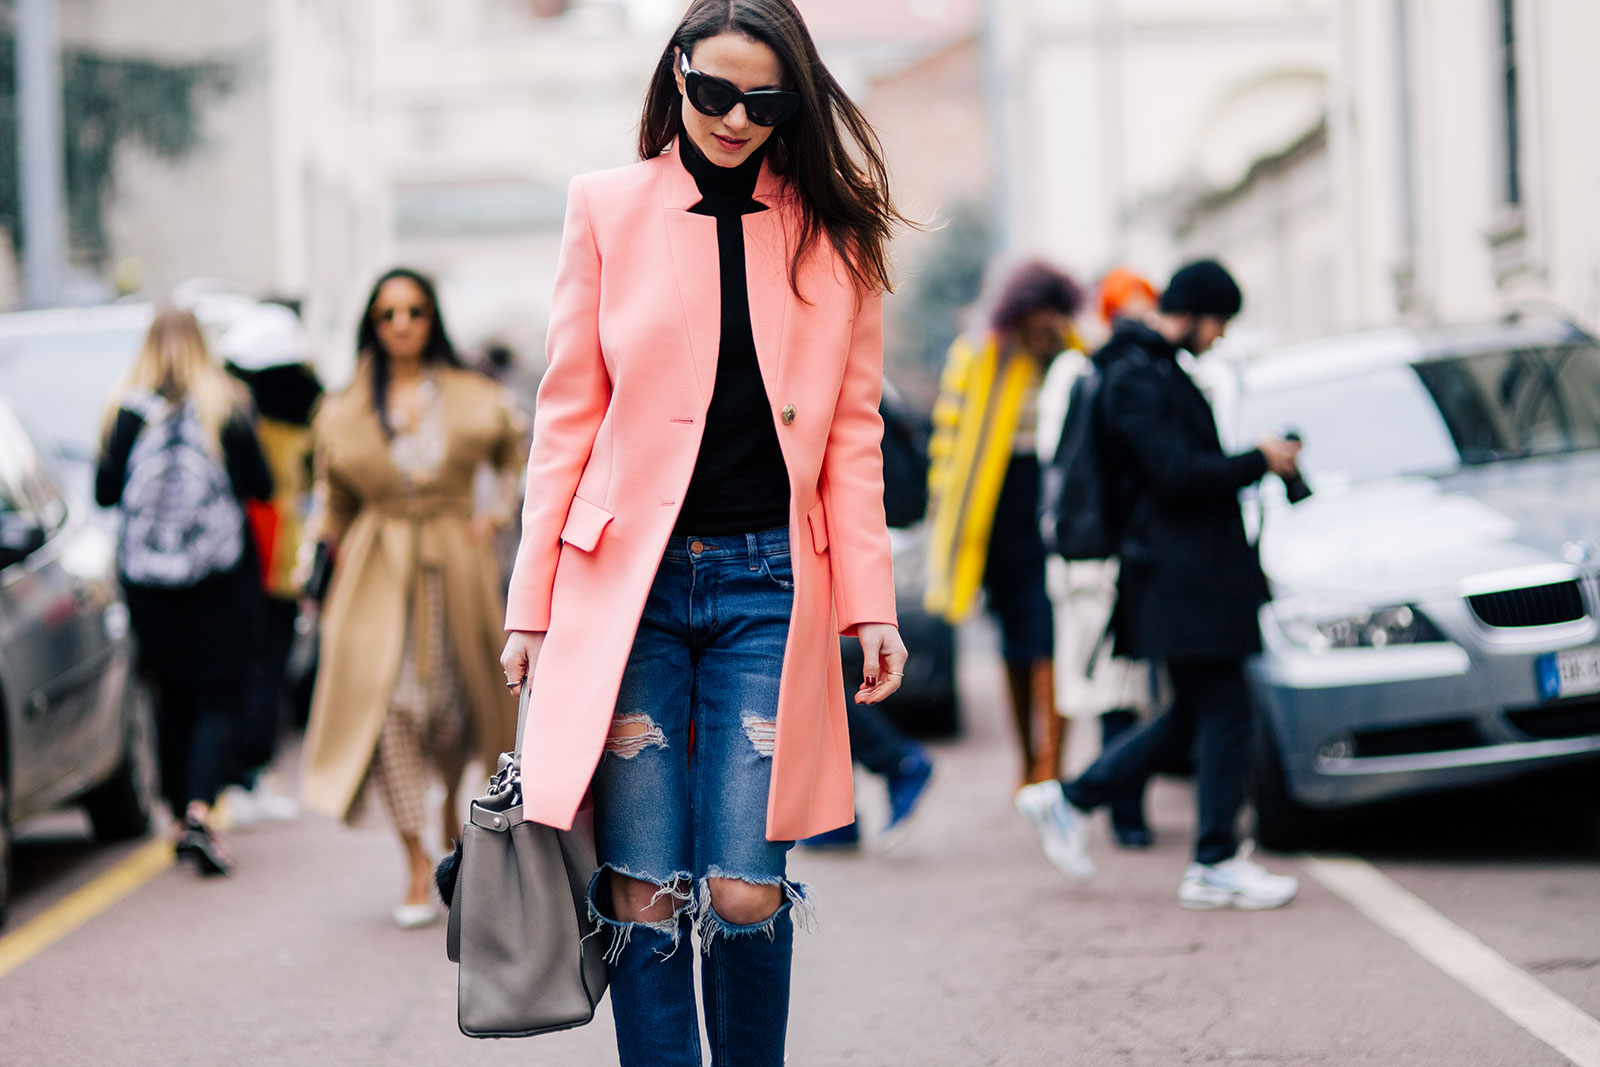 Zina Charkoplia wearing ripped jeans and pink Emilio Pucci coat in Milan, Italy